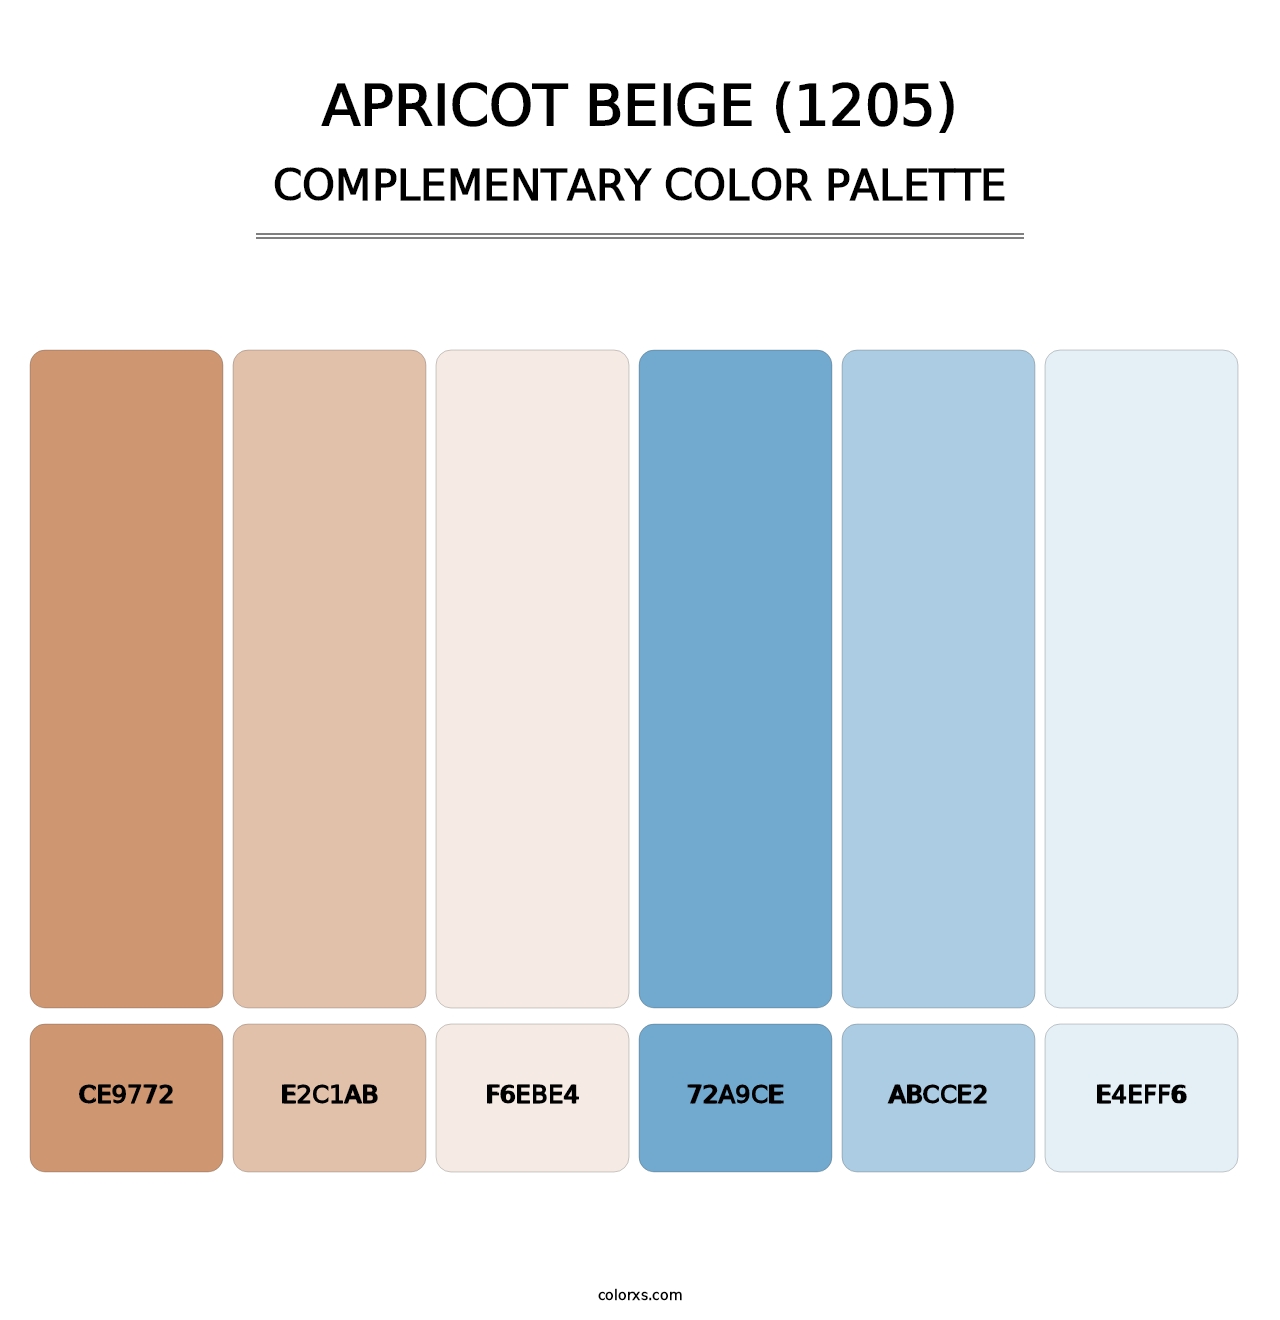 Apricot Beige (1205) - Complementary Color Palette